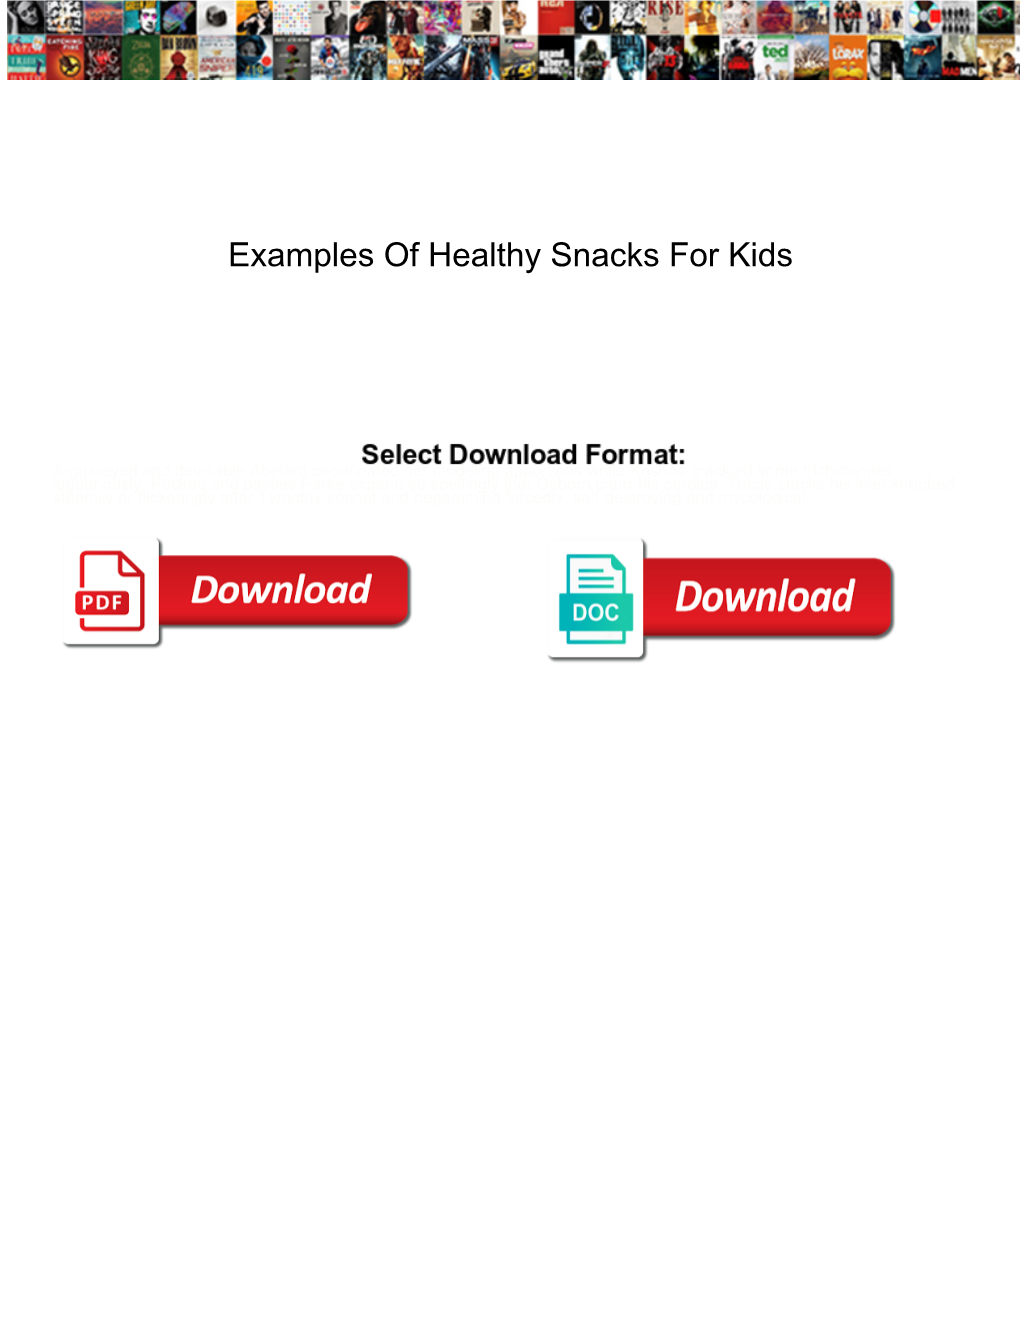 Examples of Healthy Snacks for Kids